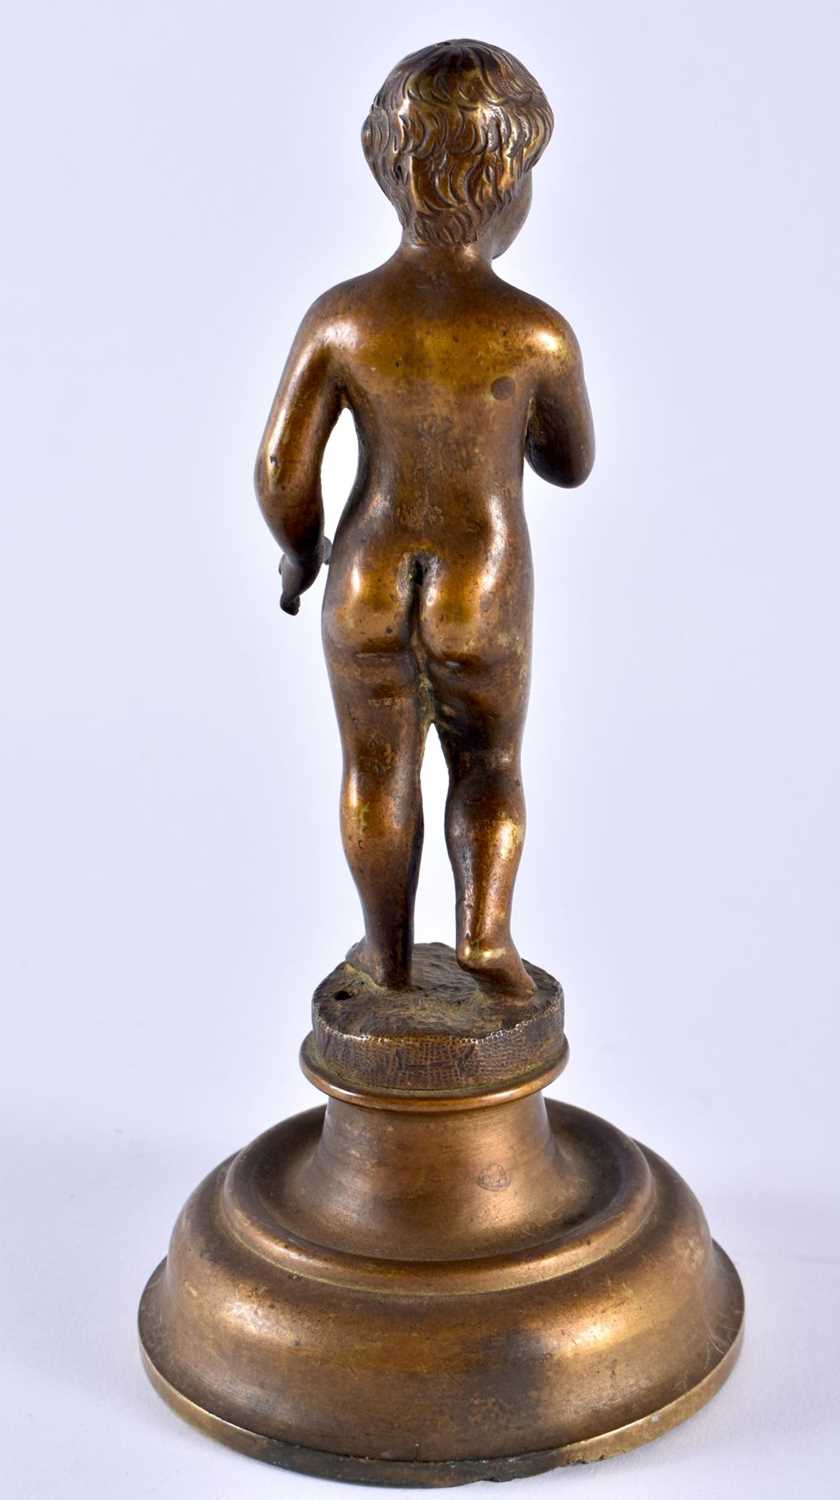 AN EARLY 20TH CENTURY EUROPEAN BRONZE FIGURE OF NUDE modelled upon a circular base. 17 cm high. - Image 4 of 5